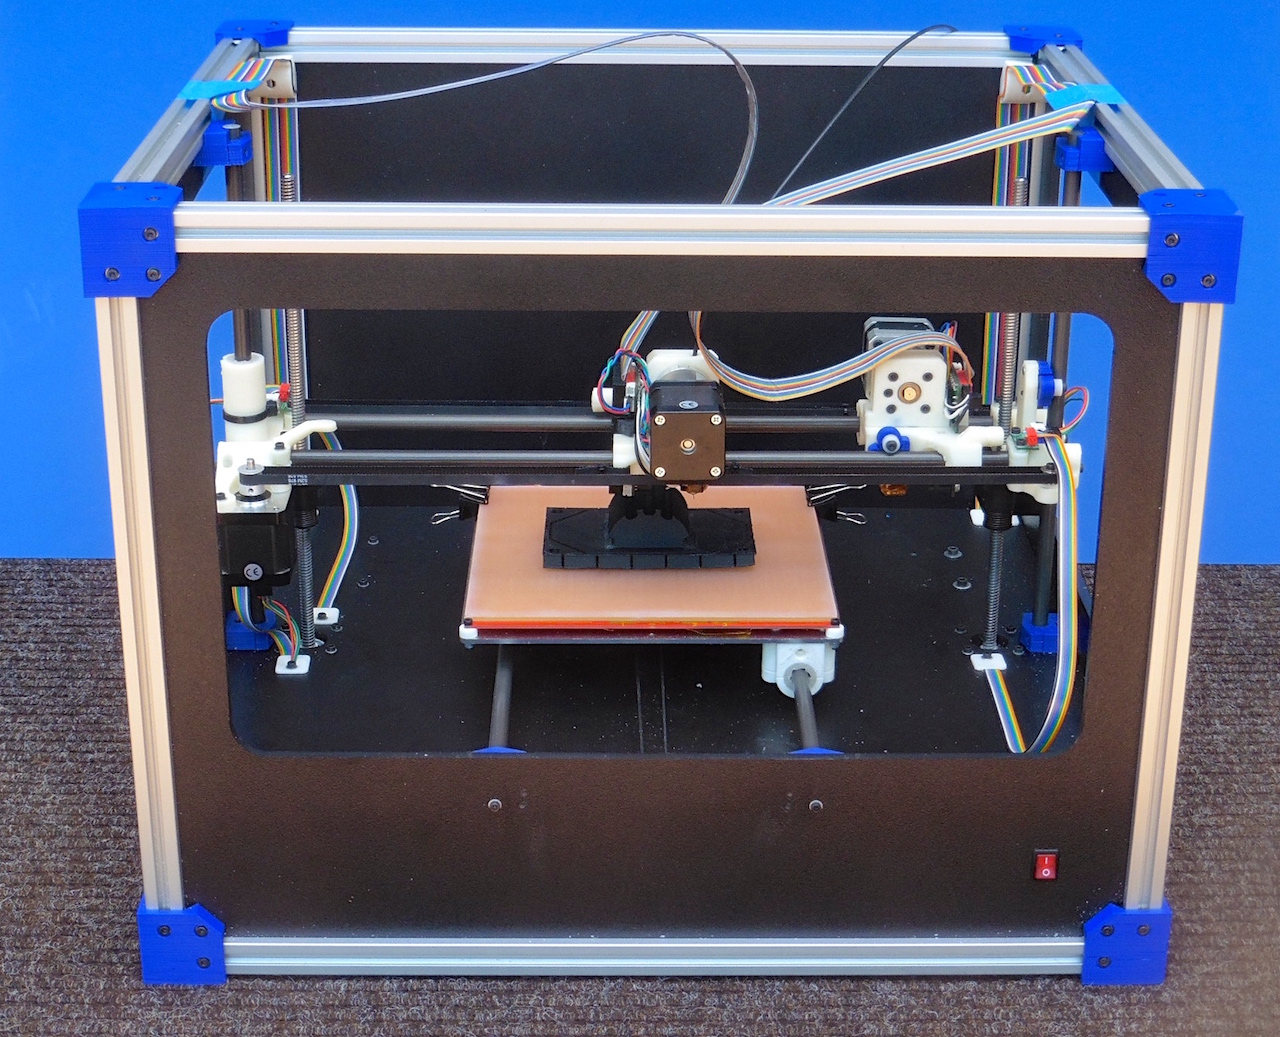  The 3D printer used by Avante Technology to produce the 3D printed injection mold 